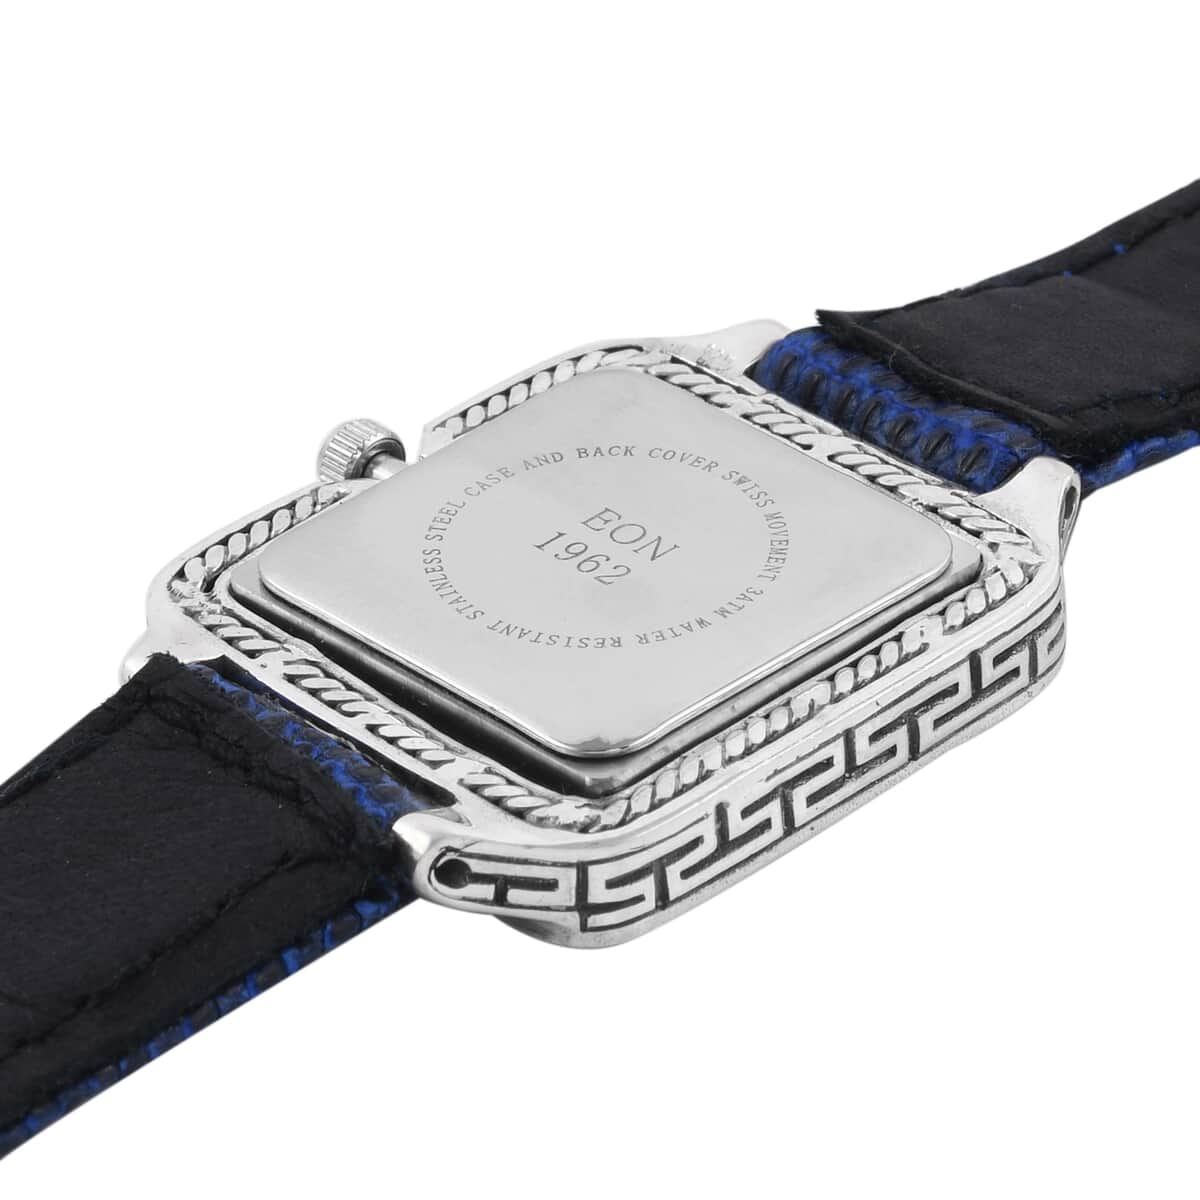 BALI LEGACY EON 1962 Lapis Lazuli Swiss Movement Watch in Sterling Silver and Stainless Steel with Royal Blue Lizard Color Leather Strap (20 g) image number 4